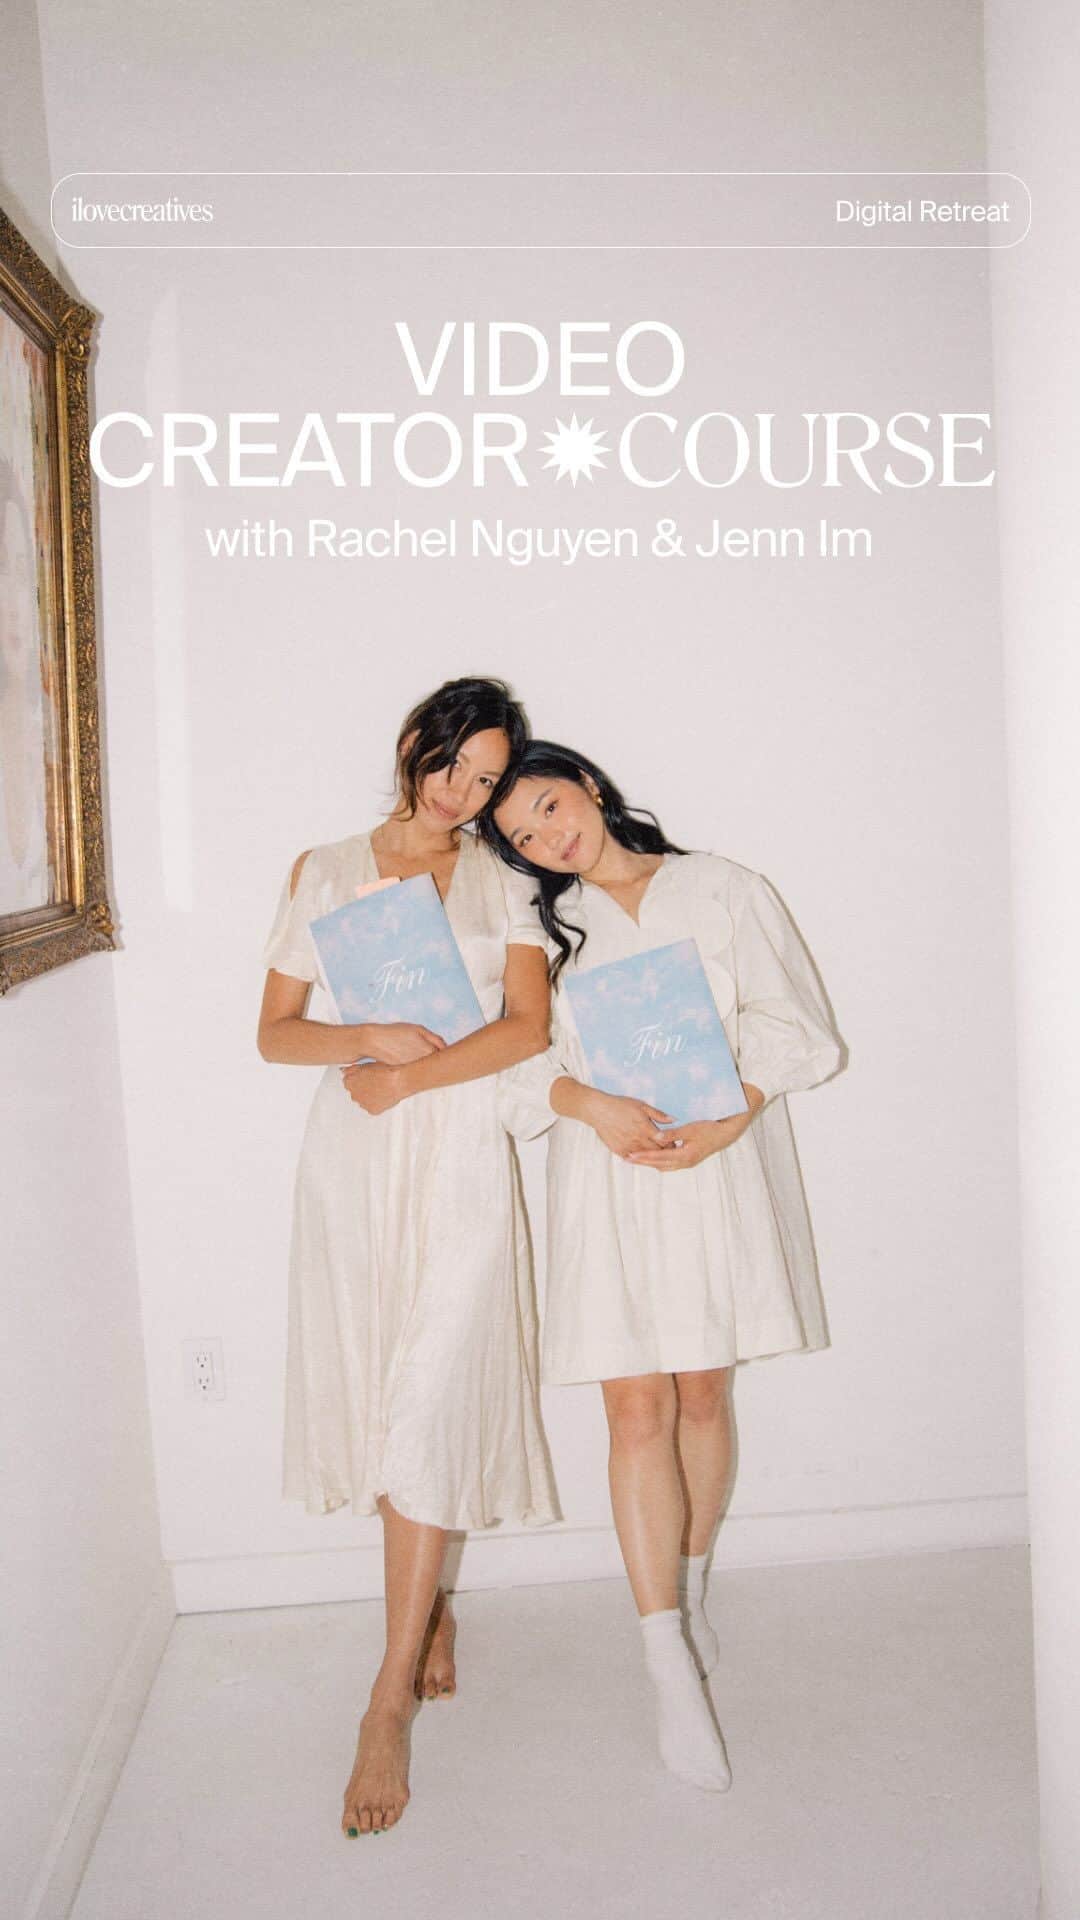 Jenn Imのインスタグラム：「Wanna learn how to create a video? Snag a spot in the Video Creator Course’s Summer Digital Retreat. 📹⁣ ⁣⁣ I’ll be teaching all things video creation alongside Rachel of @thatschic at @ilovecreatives for a four-week (8 live calls)  Digital ℛetreat  where you’ll learn our process for creating a video from start to finish—while you work on one too!⁣⁣ ⁣ Here are the deets:⁣ ⁣ When is it?⁣ ⁣ 🗓️July 18th - August 10th on Tuesdays and Thursdays, from 3:00 - 4:30 PM PT.⁣ ⁣ - Week 1: Orientation, Brainstorming⁣ - Week 2: The Creative Brief, Treatment⁣ - Week 3: Film/Edit, Office Hour, Draft Feedback⁣ - Week 4: Showcase 1 & 2⁣ ⁣ What is included?⁣ ⁣ - The Video Creator Course with That’s Chic⁣ - “The Creative Process” physical workbook⁣ - 8 Live Calls with Rachel & me⁣ - Access to the special Discord Channel for digital retreaters like you to connect, get questions answered, and share video lurve.⁣ ⁣ How?⁣ ⁣ Head to the linkinbio and save your spot for the course and retreat before Thursday, June 29th at 11AM PT.」